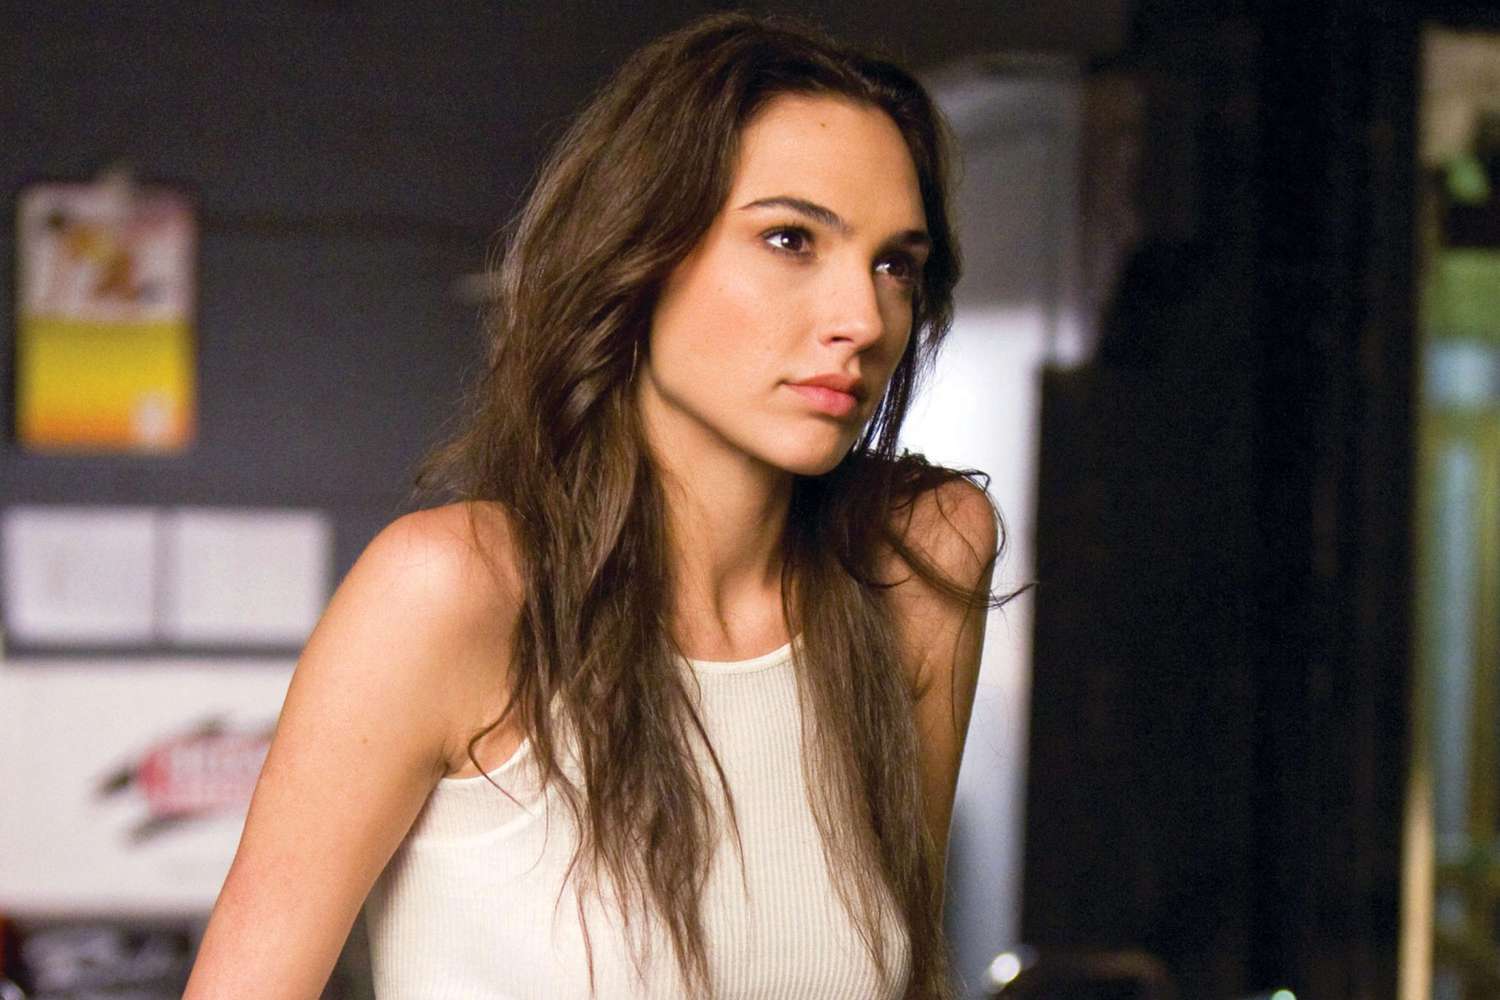 Fast Furious A Tribute To Gal Gadot As Gisele Ew Com Fast & furious 6 is actually better than its predecessor! fast furious a tribute to gal gadot